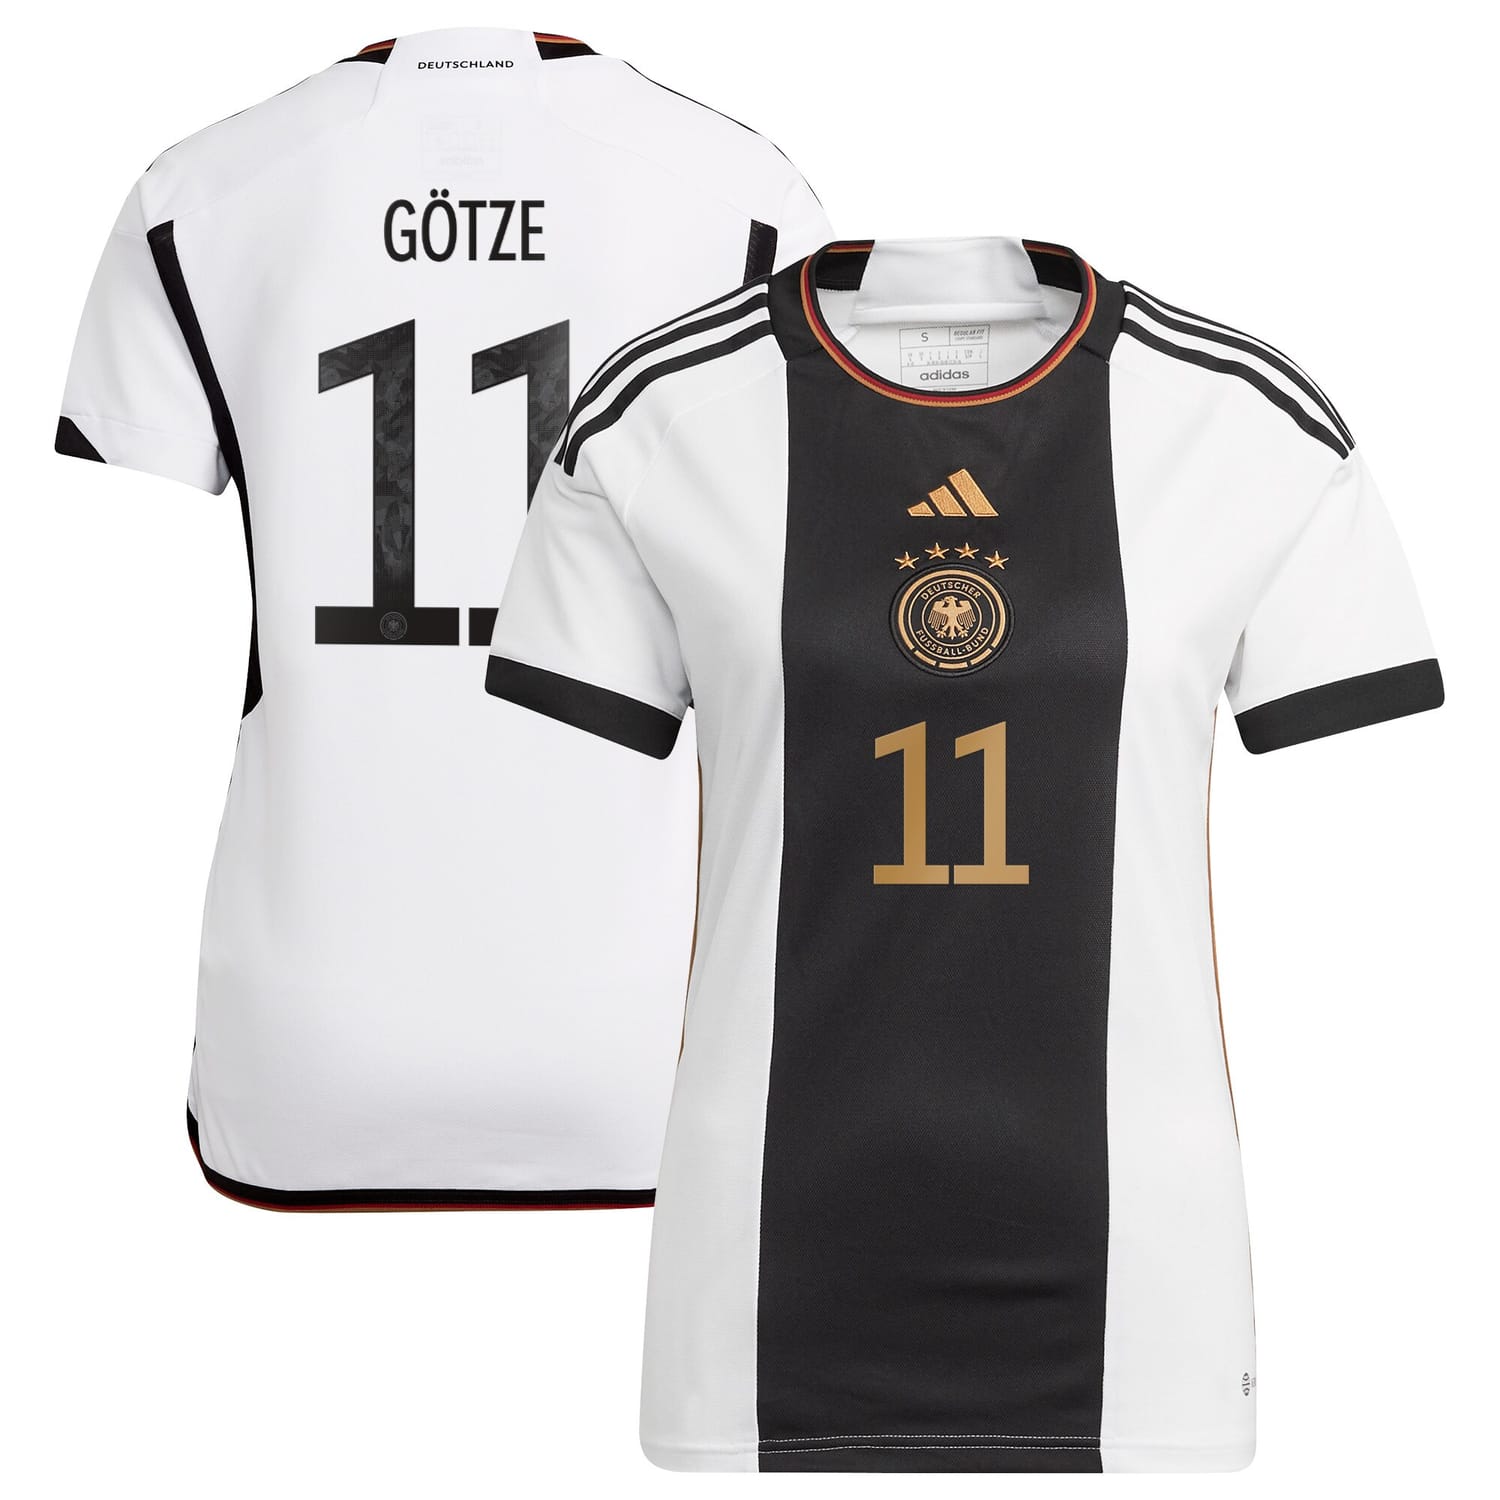 Germany National Team Home Jersey Shirt 2022 player Mario Götze 11 printing for Women